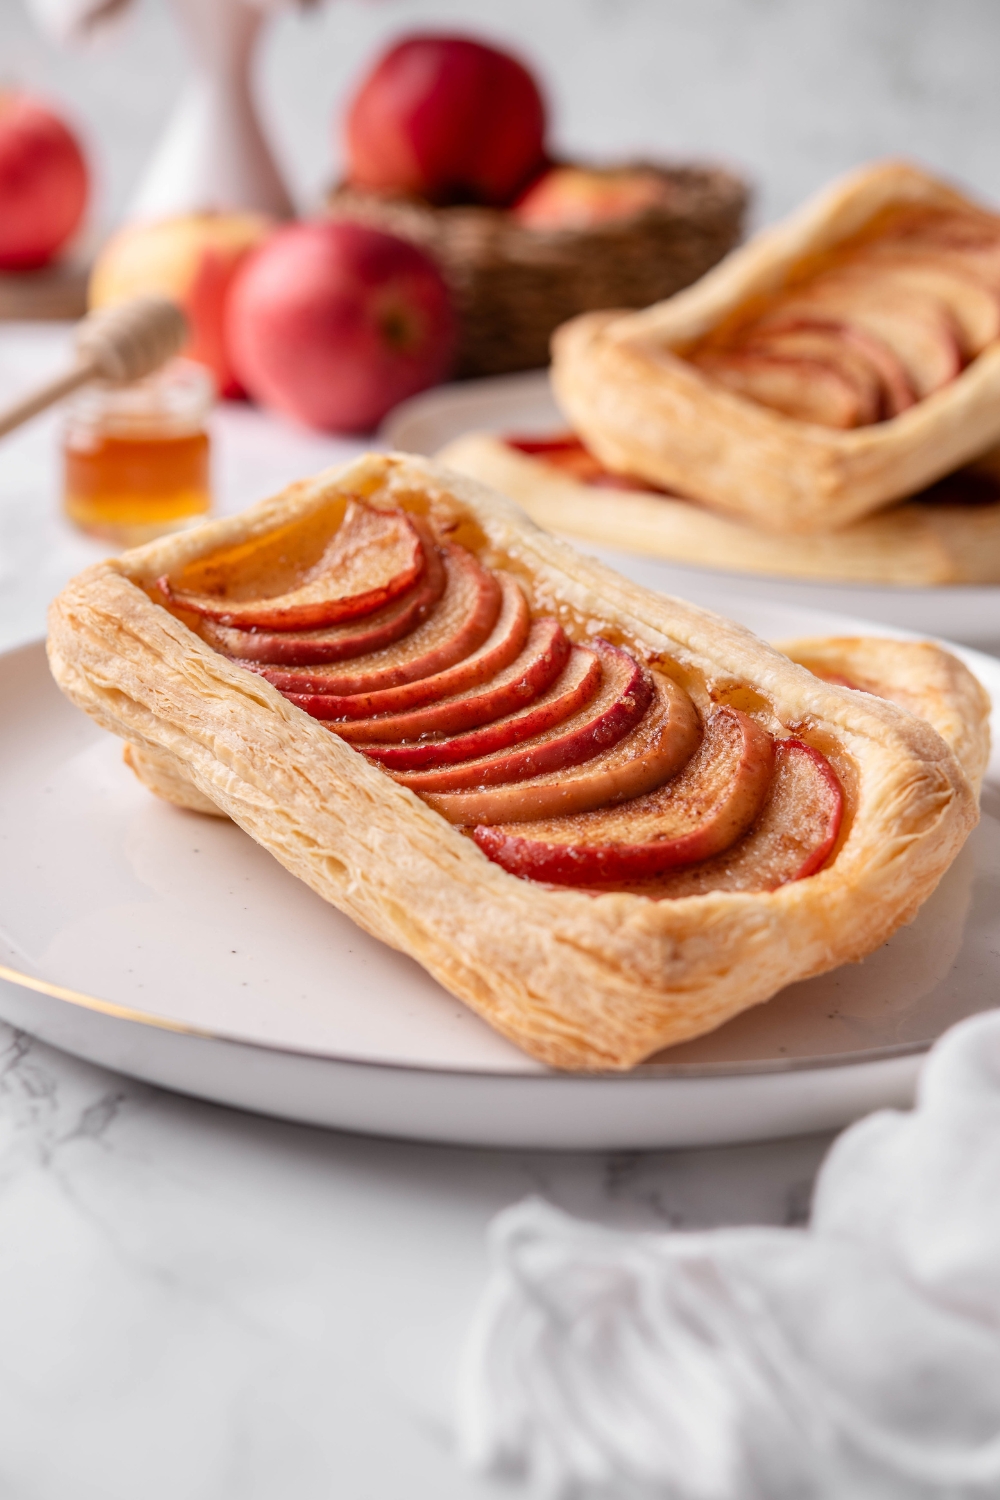 An apple puff pastry with apples overlapping one another in the middle of the pastry dough.